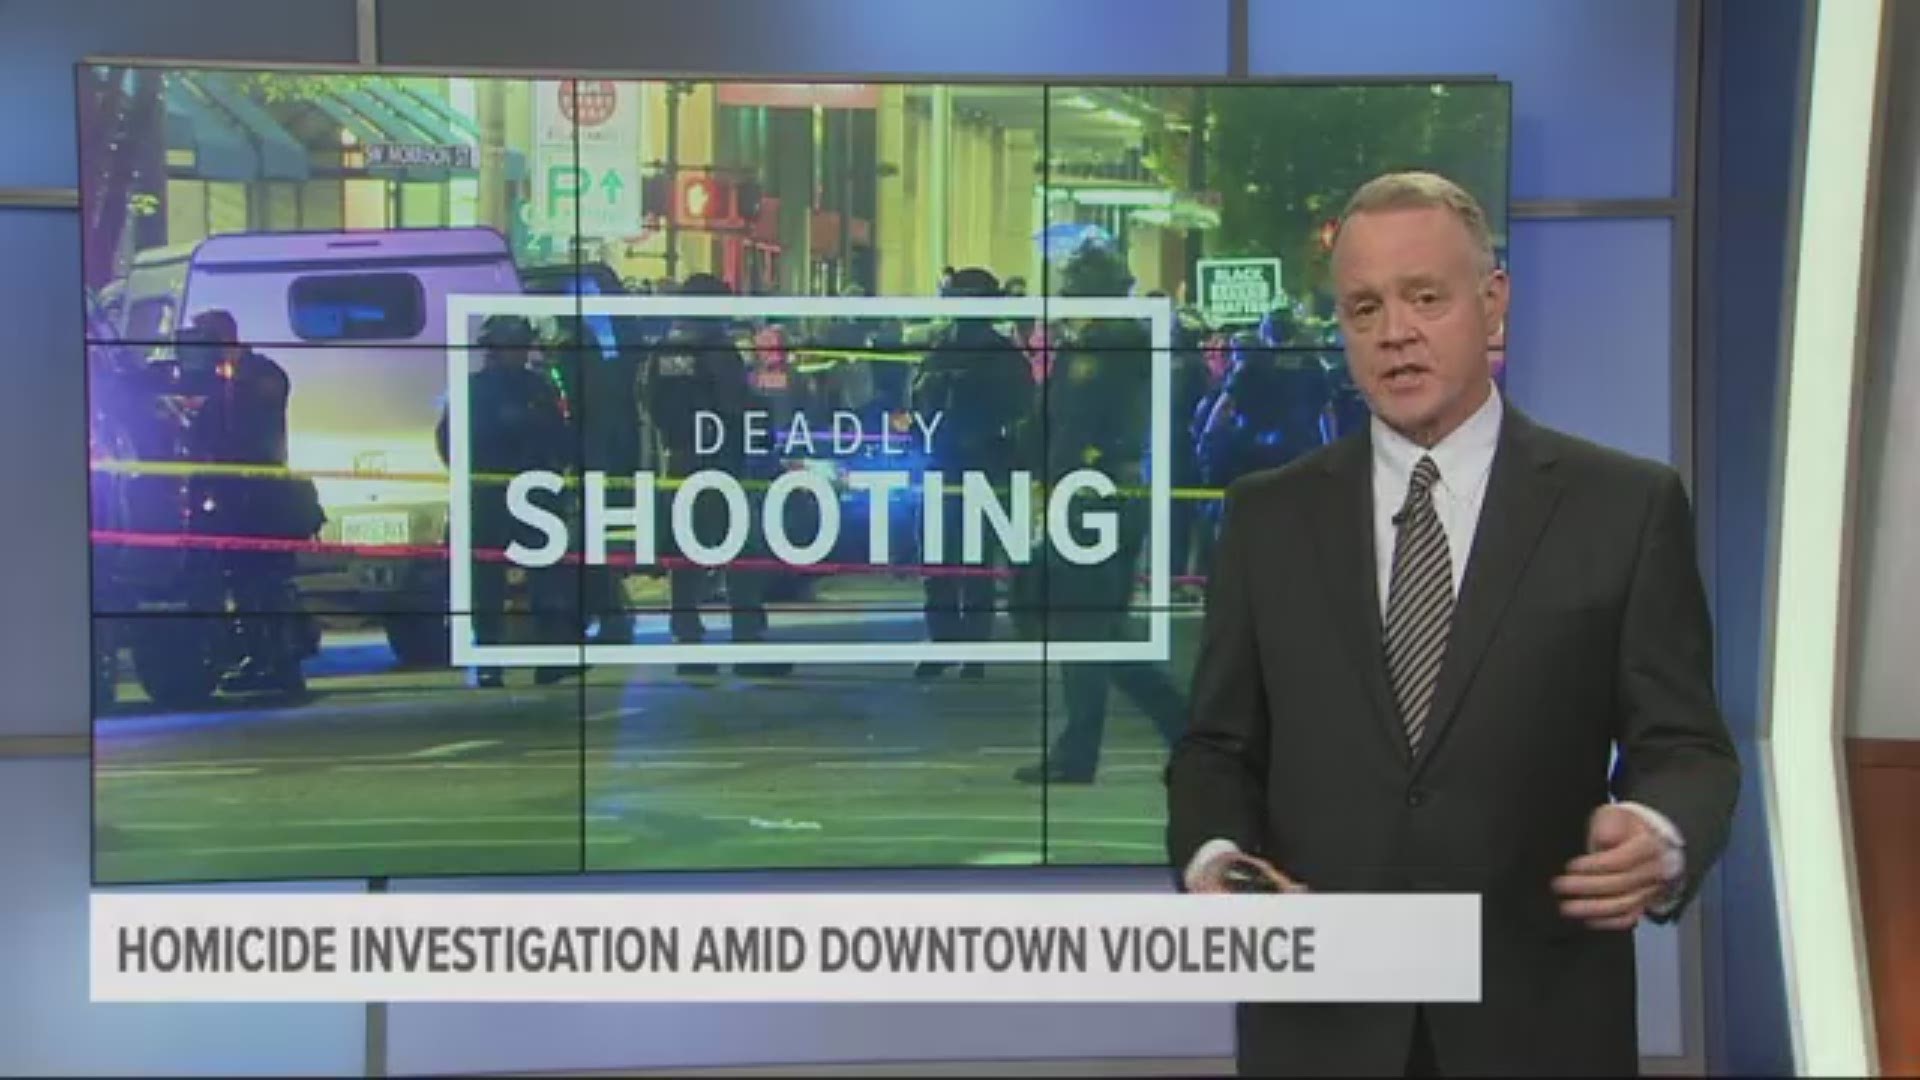 Police say there's not enough information about the shooting to know whether or not it was politically motivated.